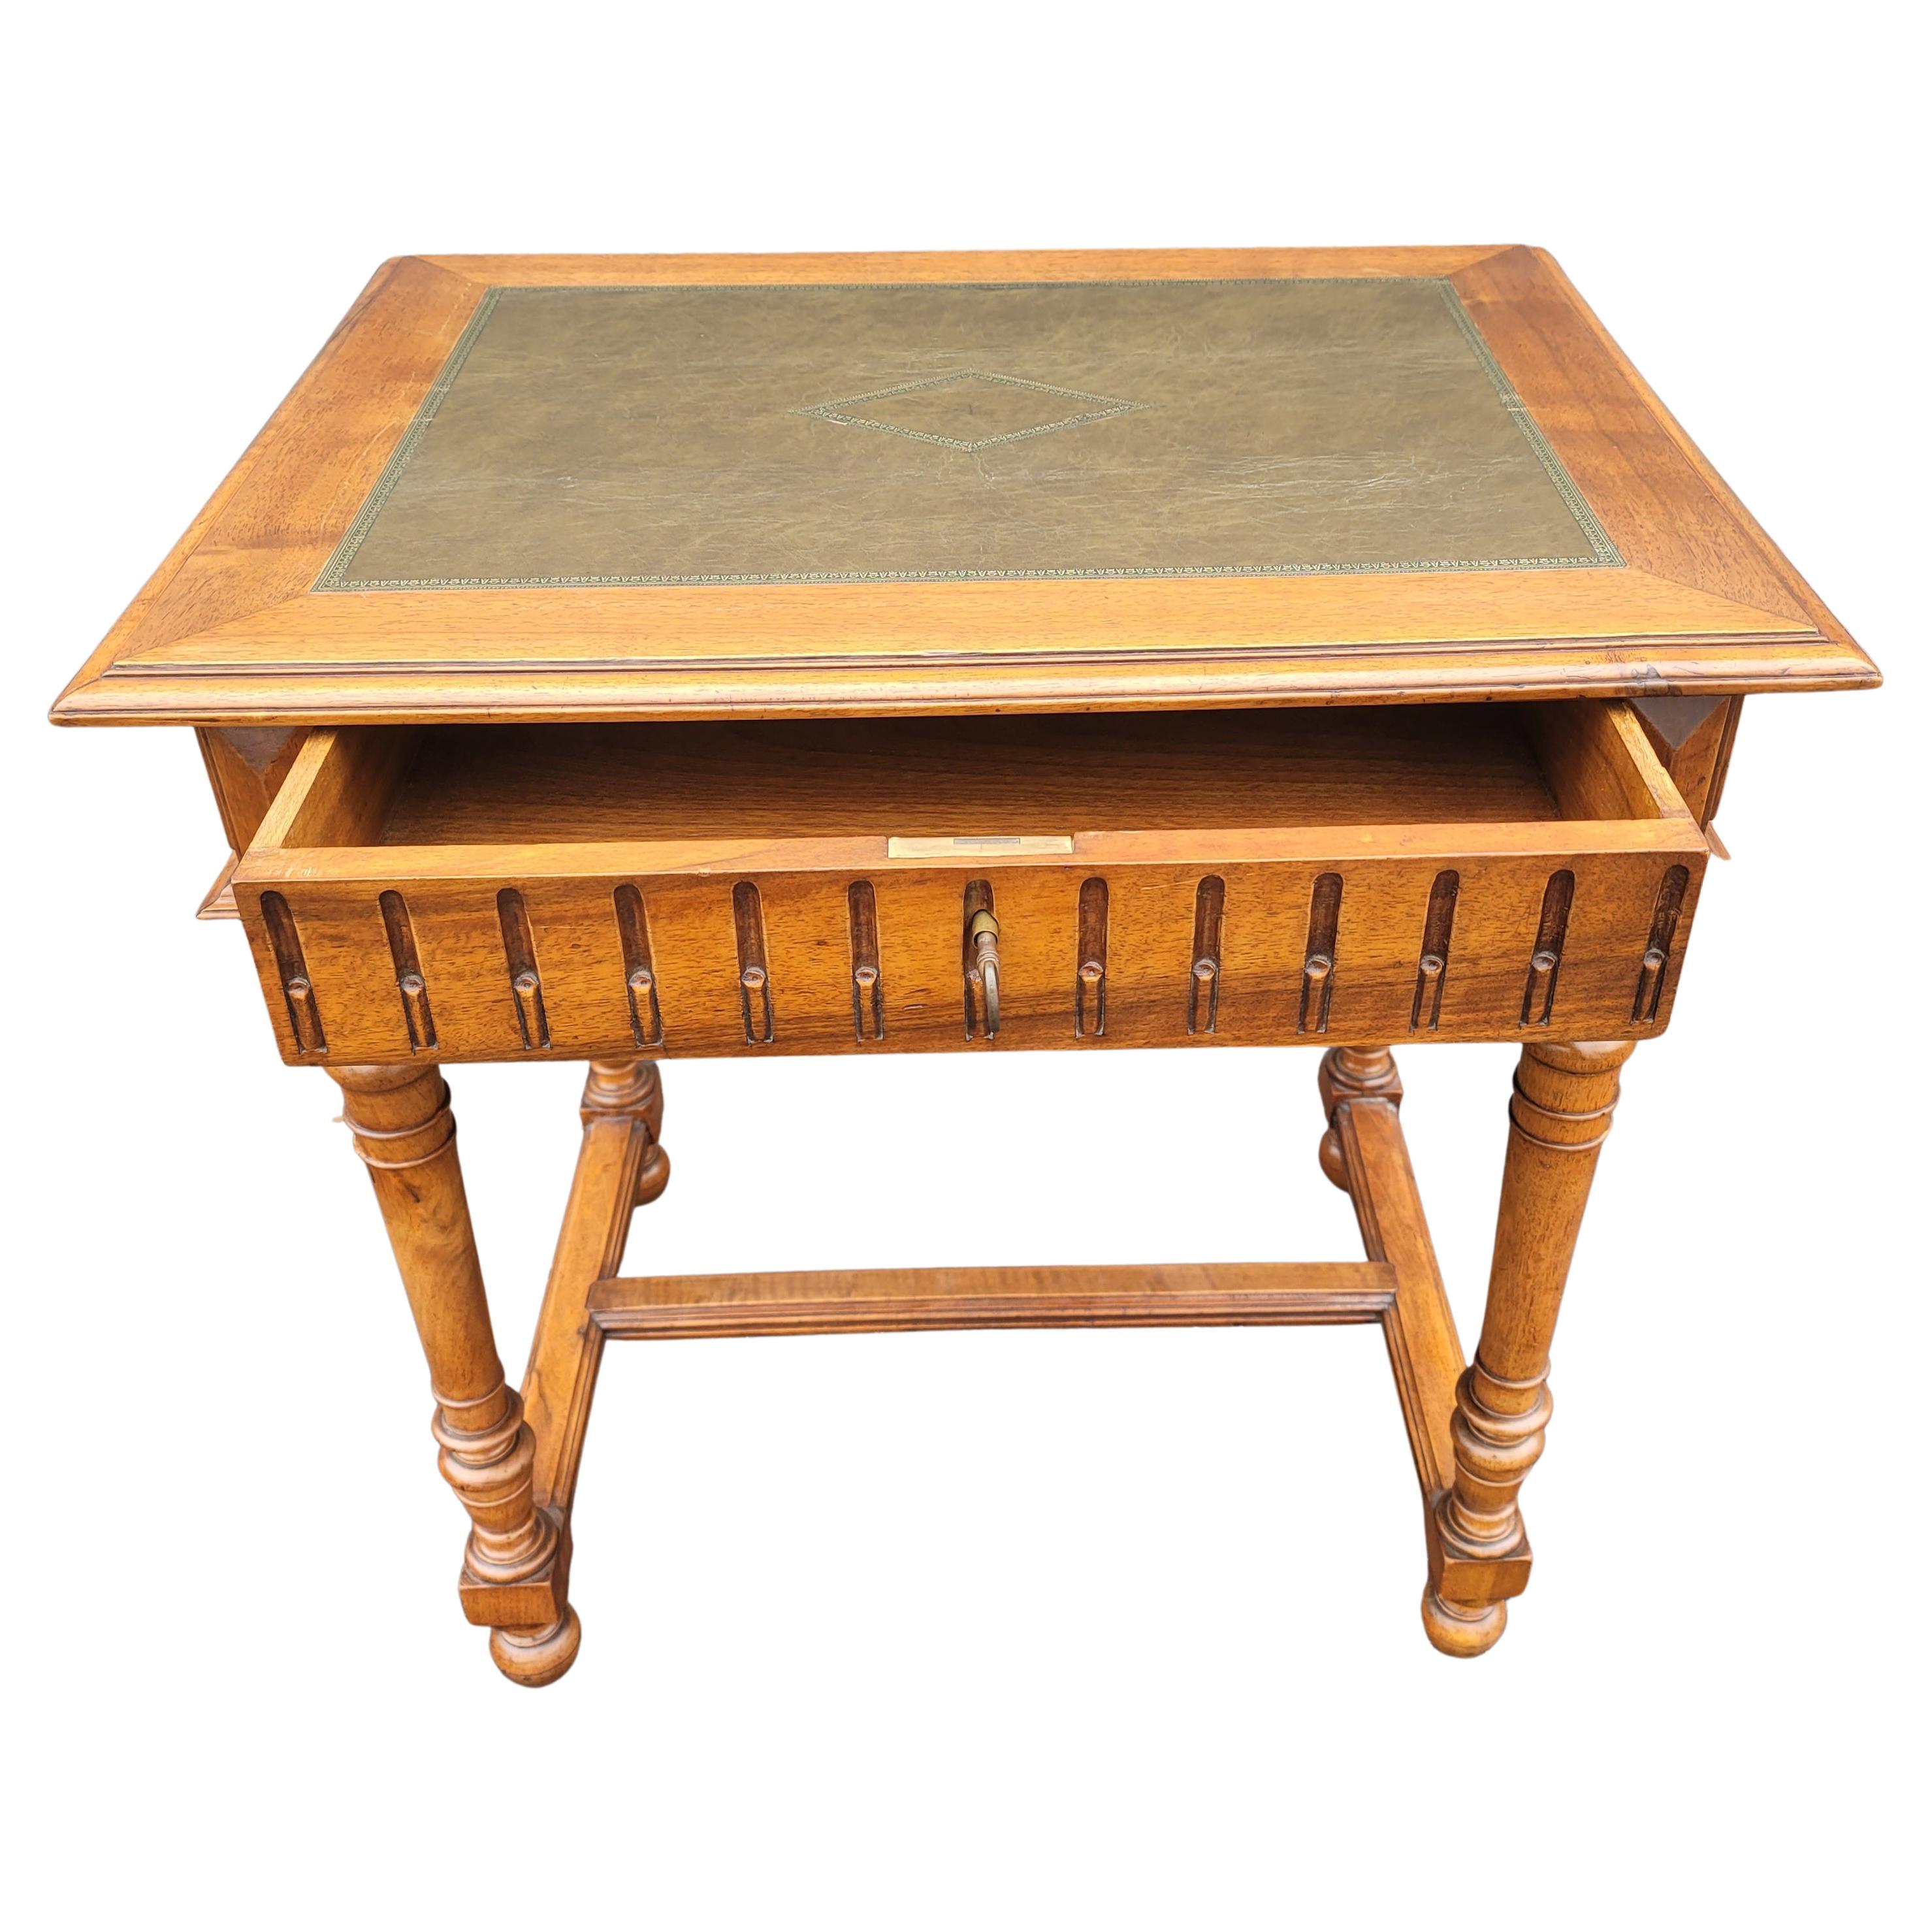 French Debournais One Drawer Tooled Leather Top Desk Table with Lock and Key In Good Condition For Sale In Germantown, MD